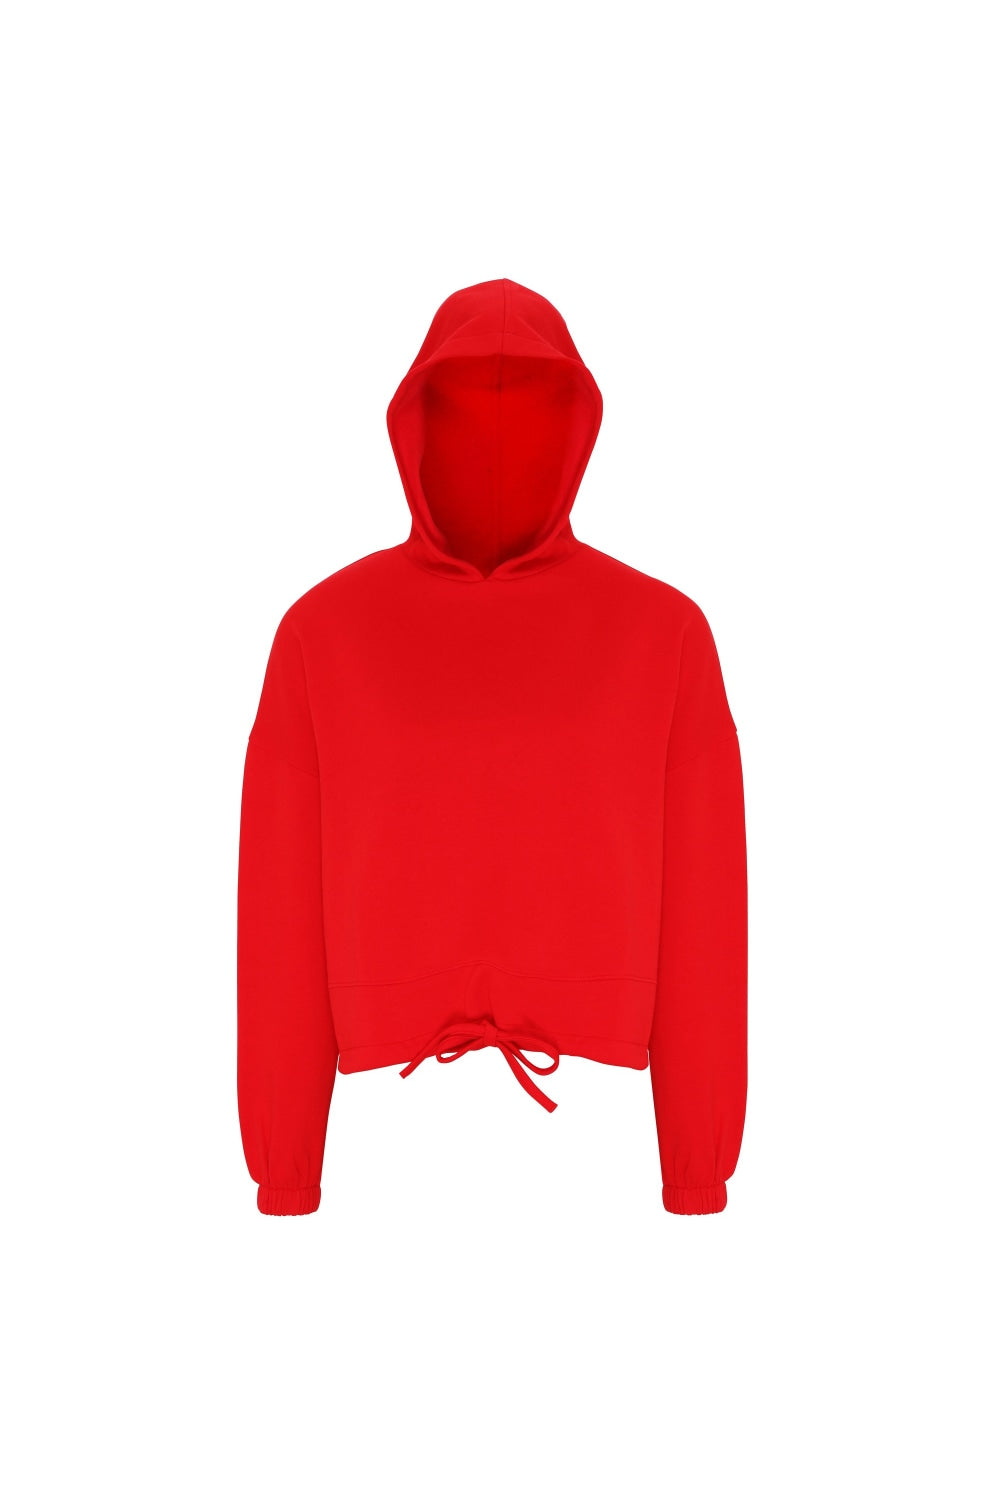 TriDri Womens/Ladies Cropped Oversize Hoodie (Fire Red)